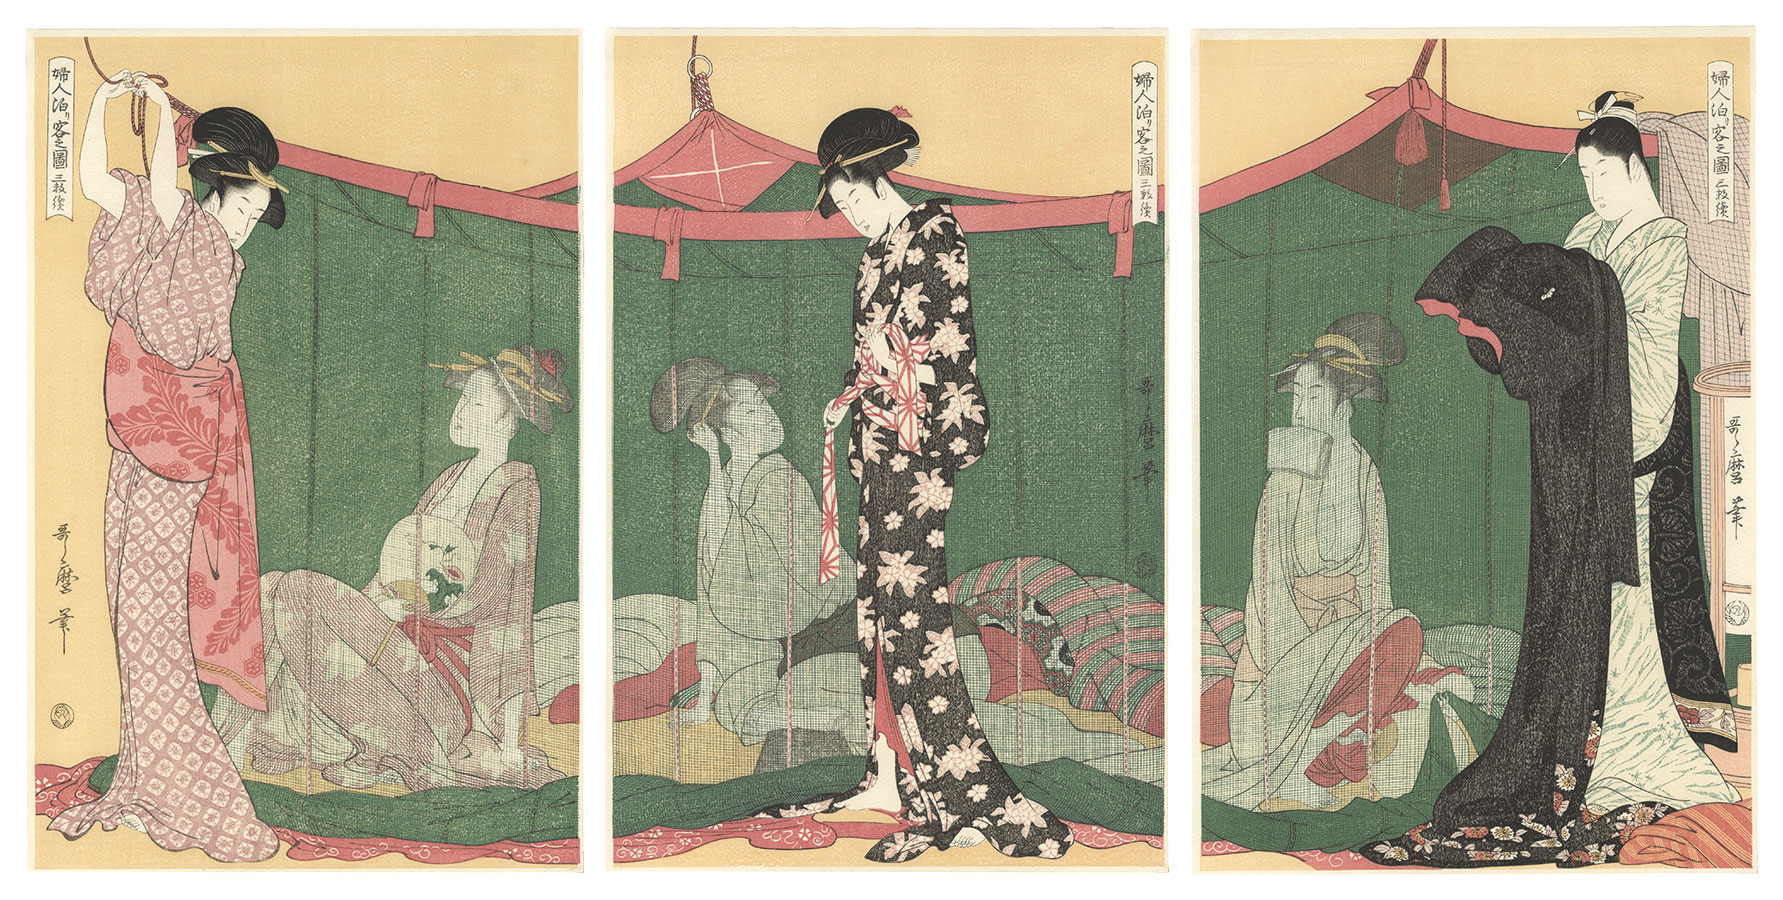 Utamaro “Woman Lodgers under a Mosquito Net【Reproduction】 ”／